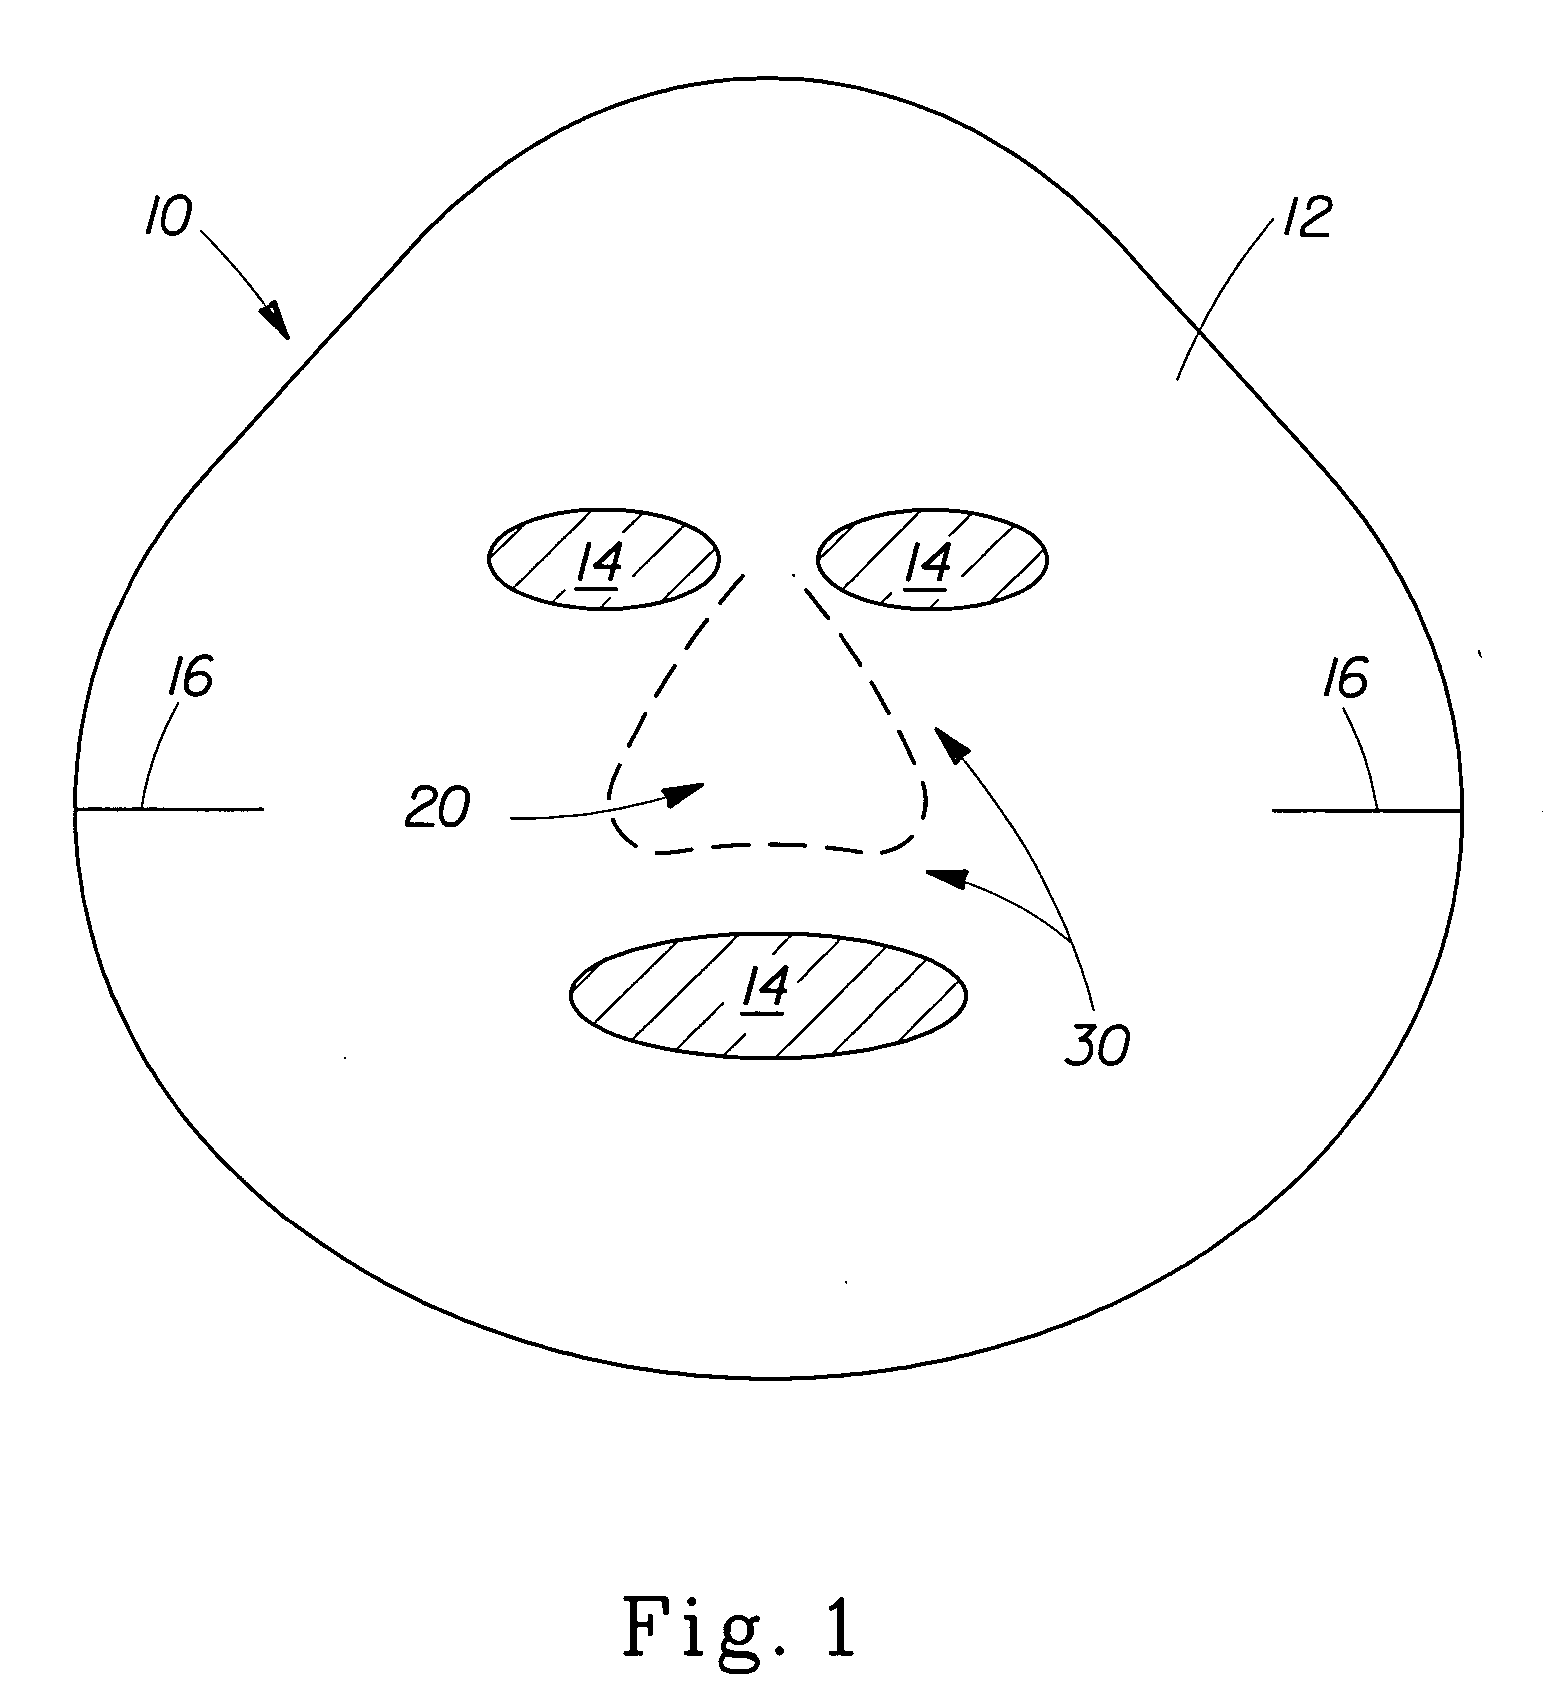 Treatment articles capable of conforming to an underlying shape